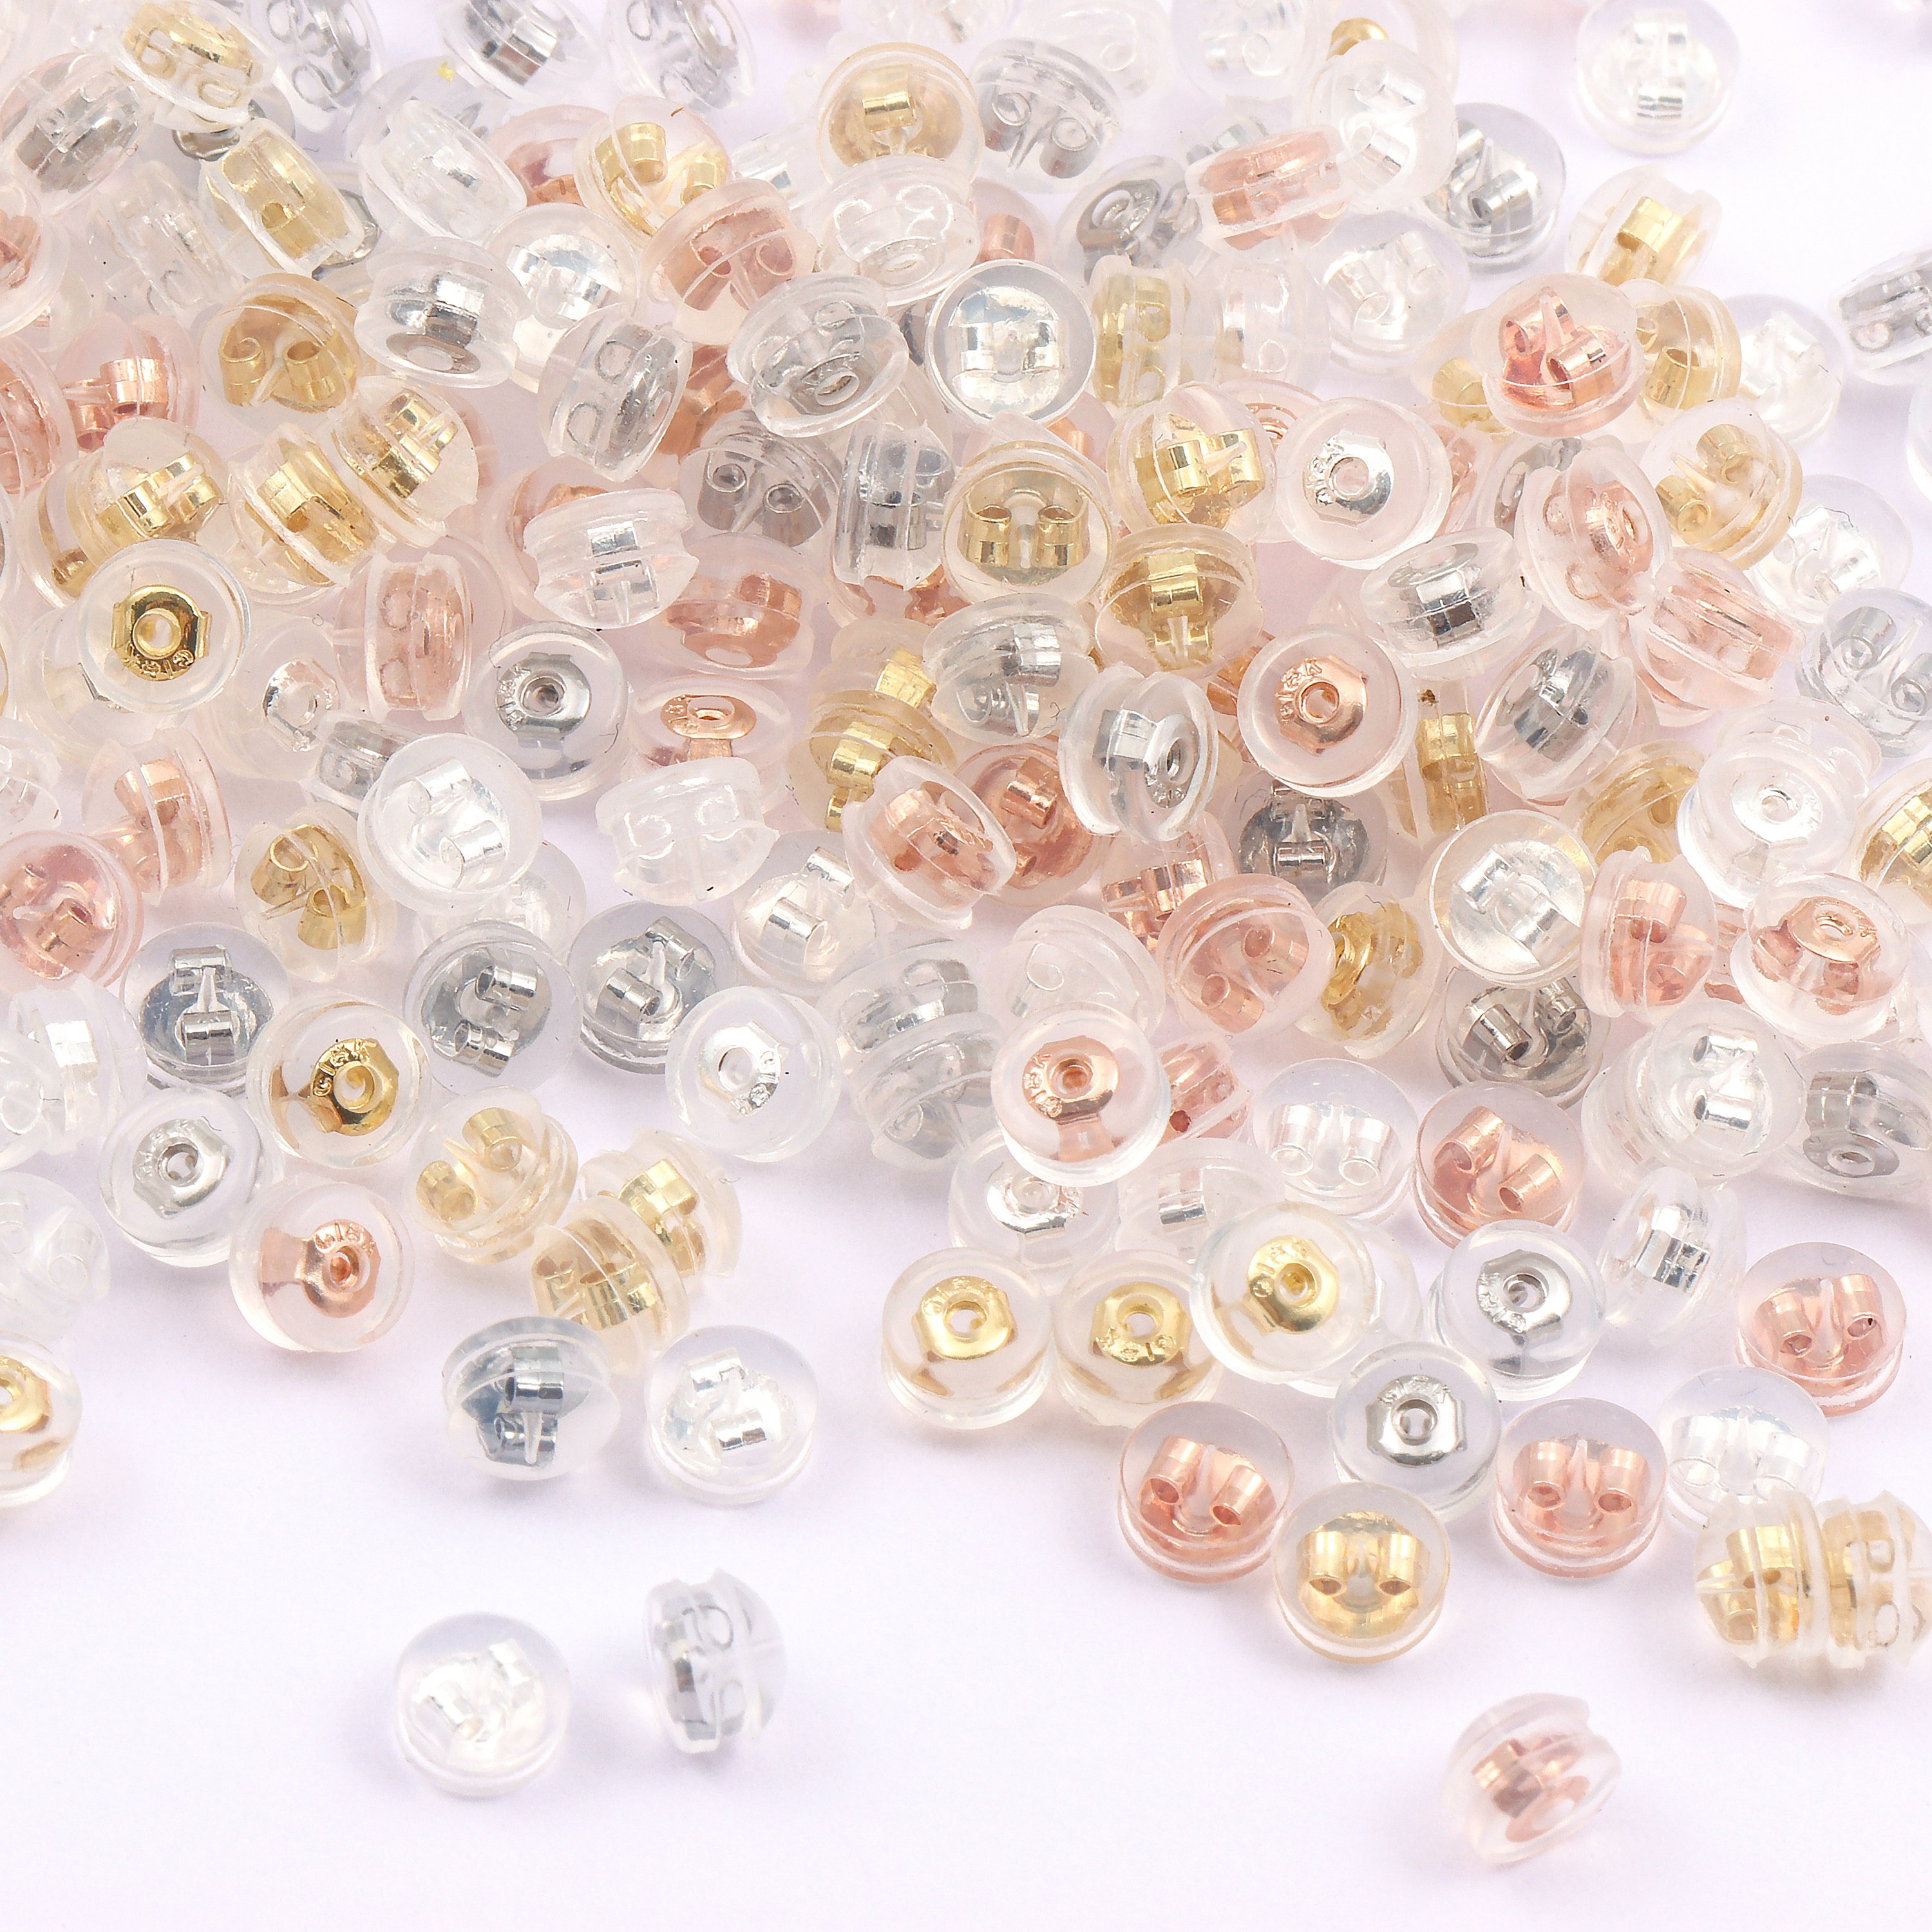 Clear Earrings For Sports, 400Pcs 18g Plastic Earrings For Sensitive Ears,  Clear Stud Earrings for Work with Solid Plastic Posts and Soft Rubber  Earring Backs in 2 Organizer Box 